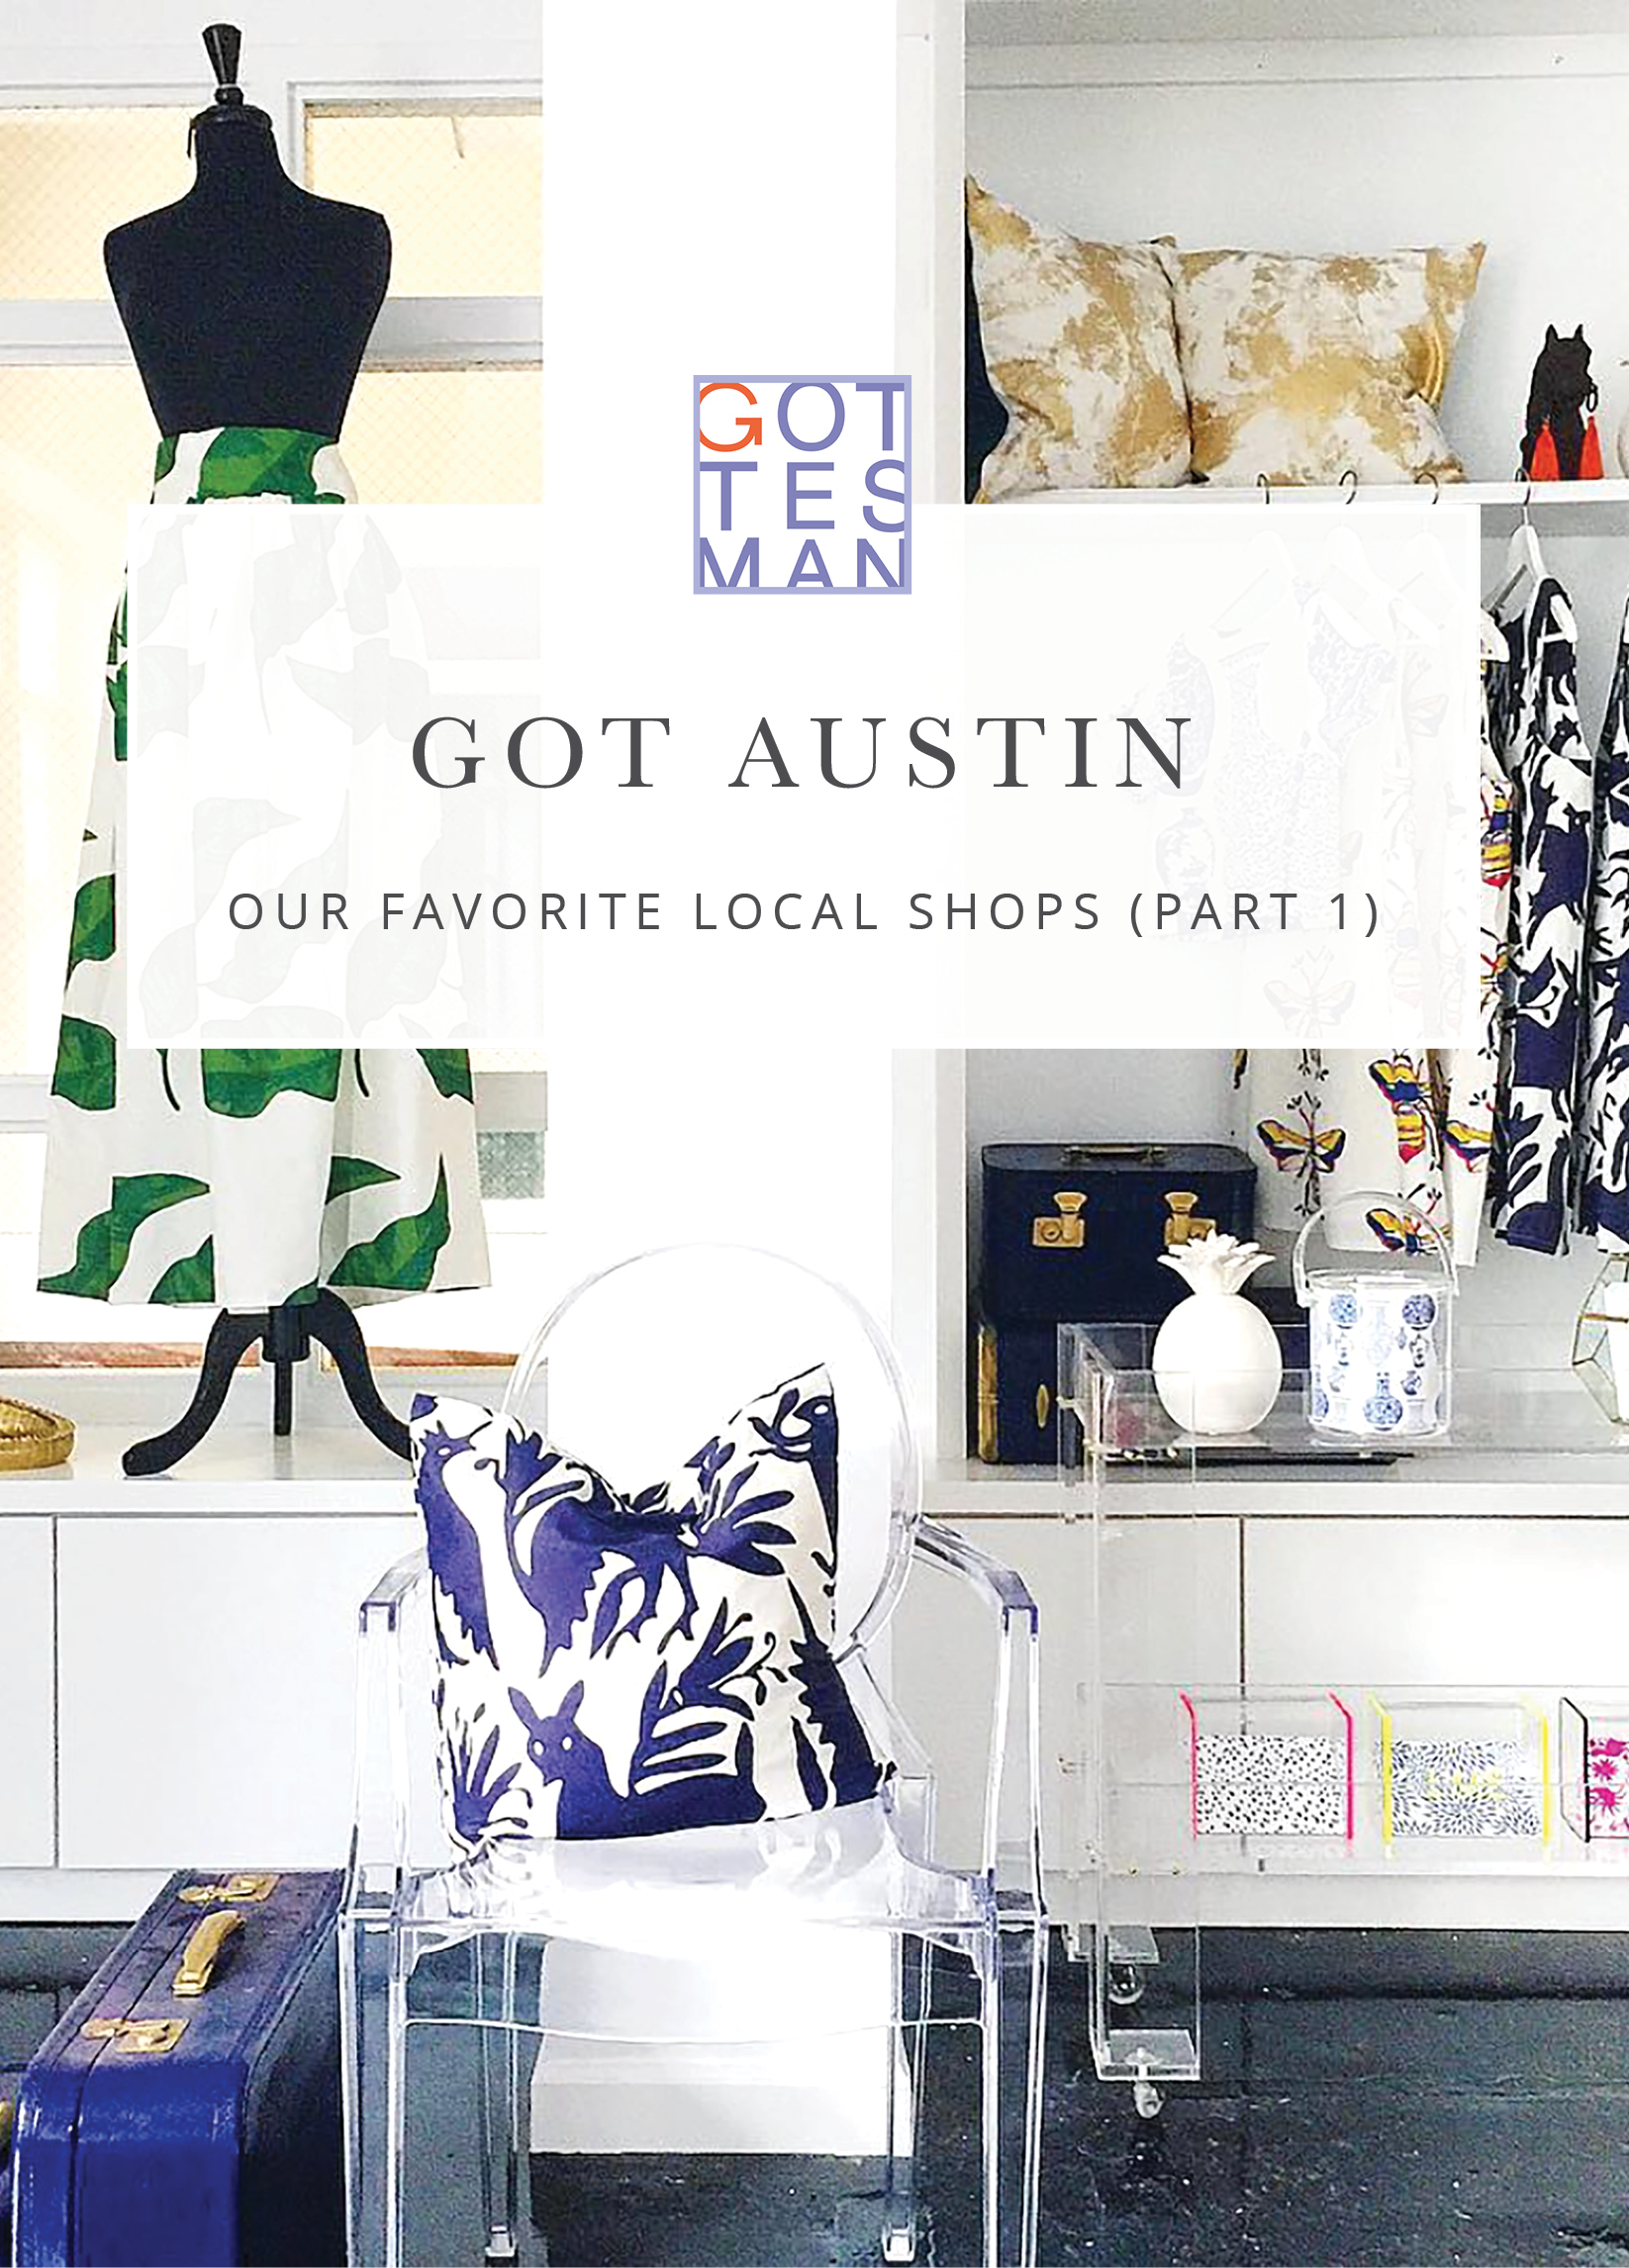 Store with text overlay, "Got Austin: Our Favorite Local Shops (Part 1)"